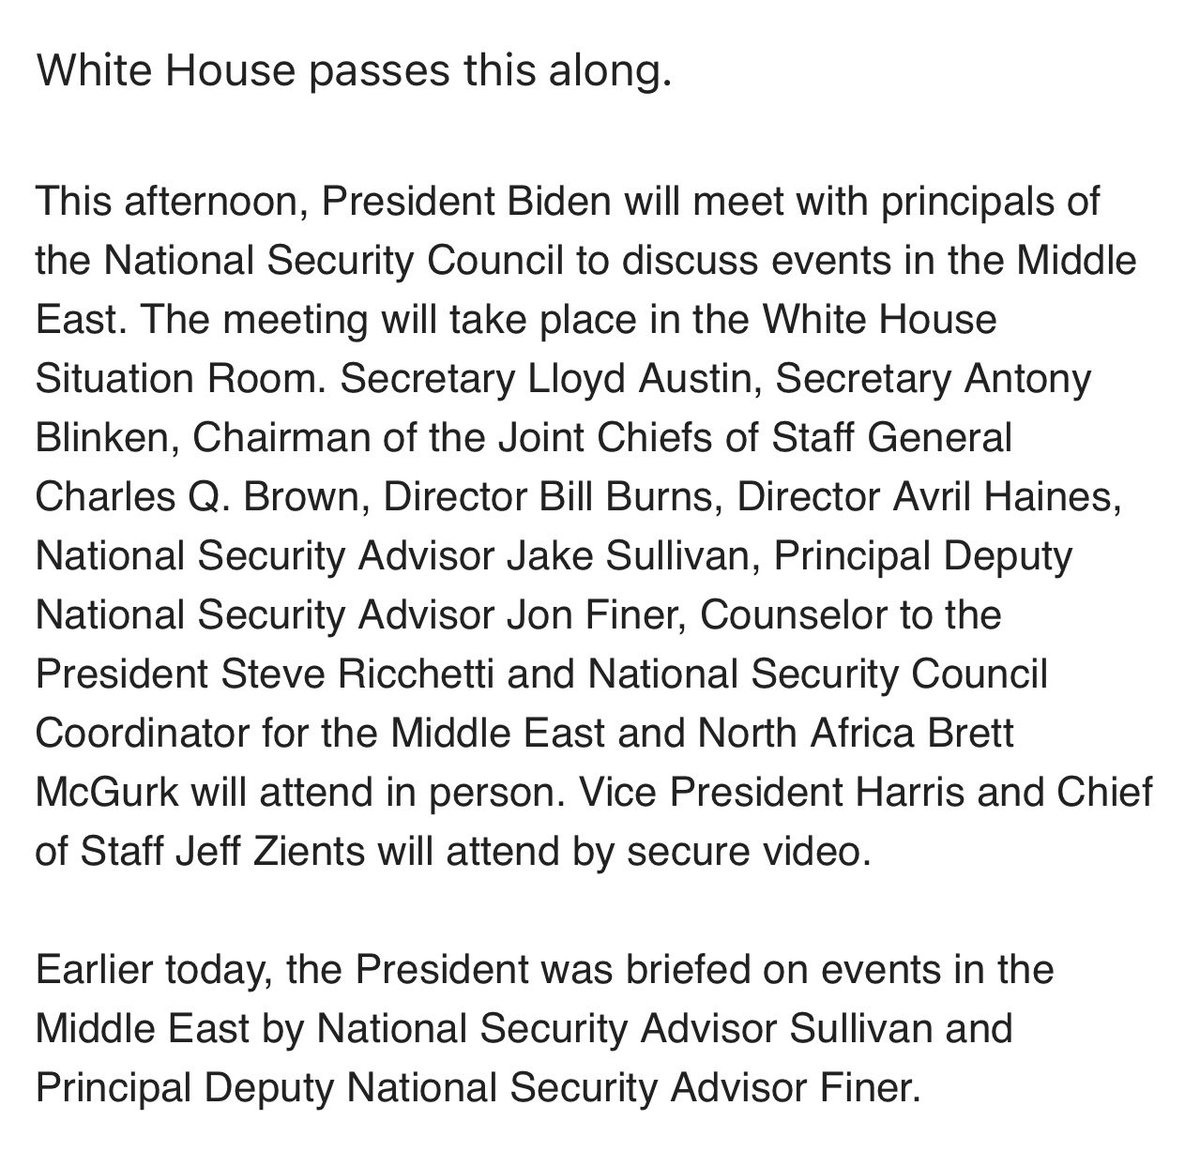 As Iran launches drones toward Israel, the WH announces that President Biden will gather in the Situation Room this afternoon with his national security team. Earlier he was briefed by NSA Sullivan & Deputy NSA Finer.